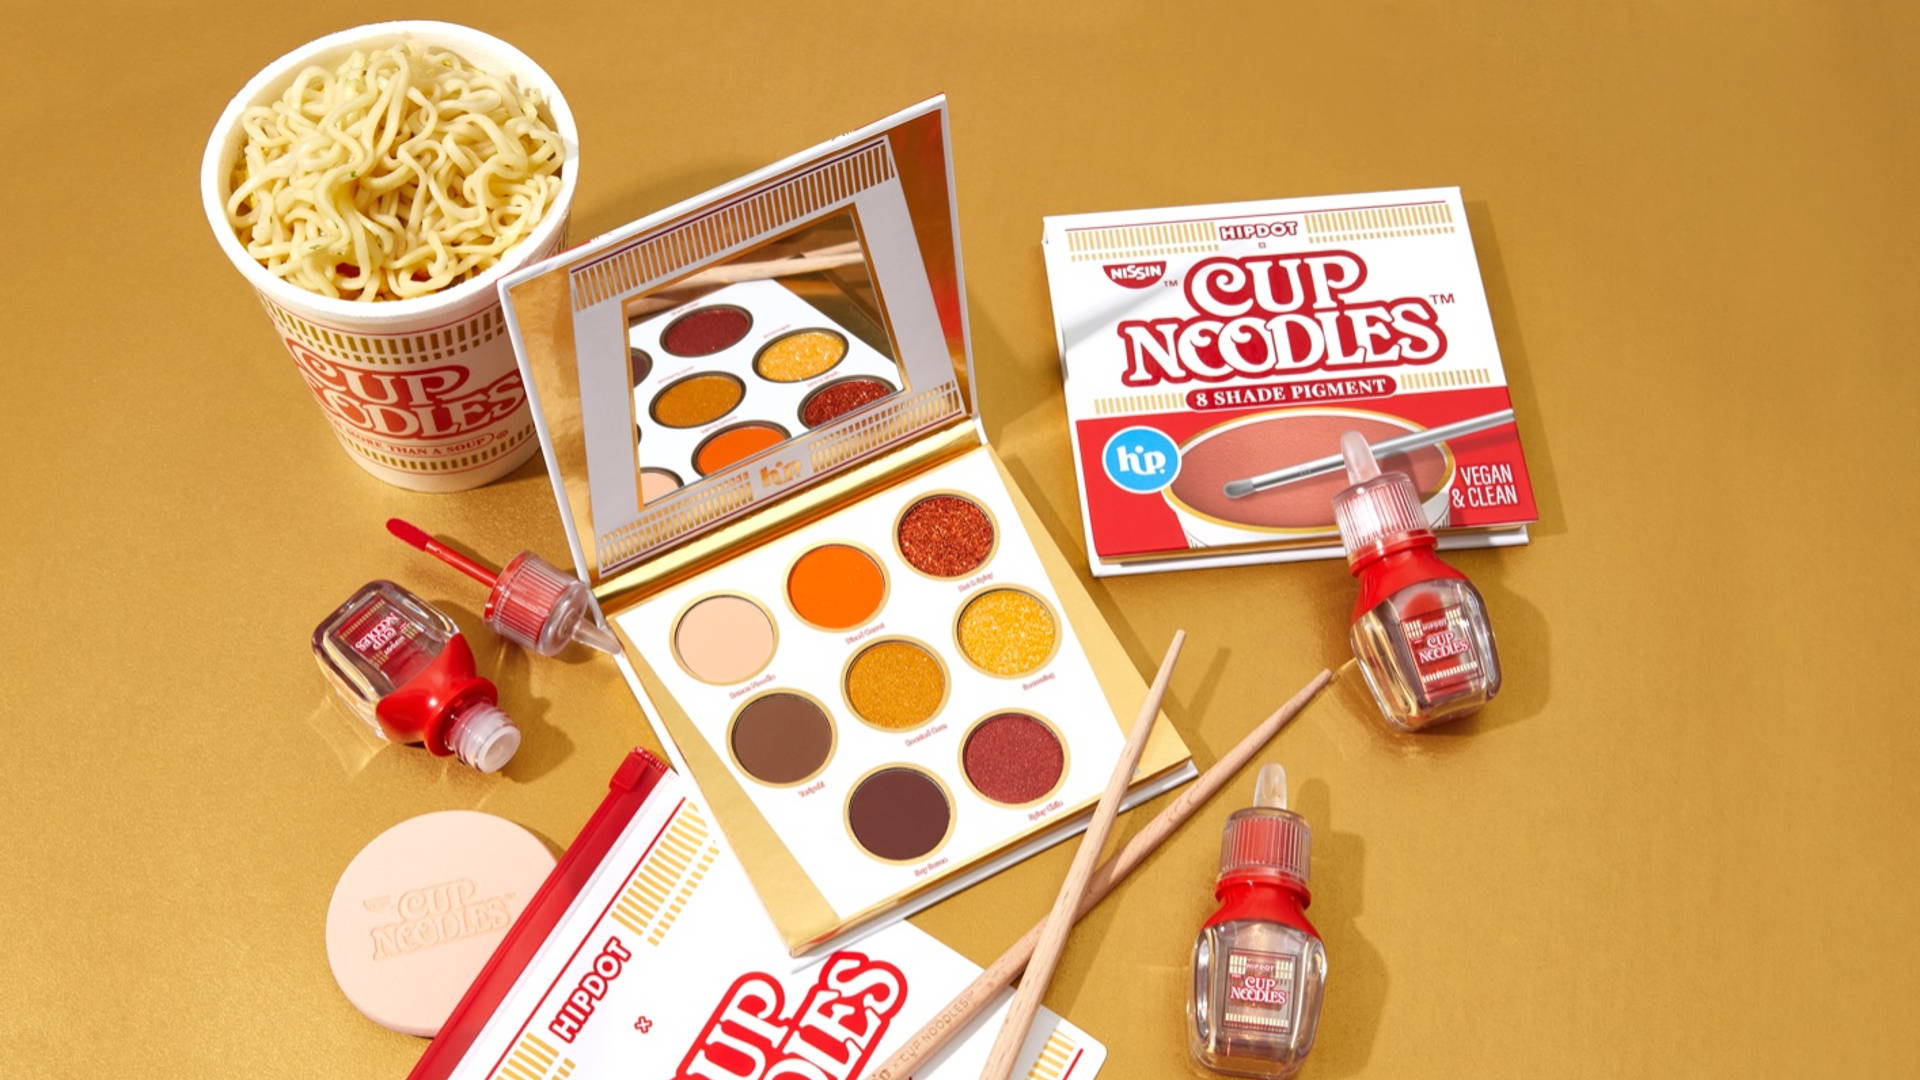 Featured image for HipDot Launches Warming & Classic Cup Noodles Makeup Collection